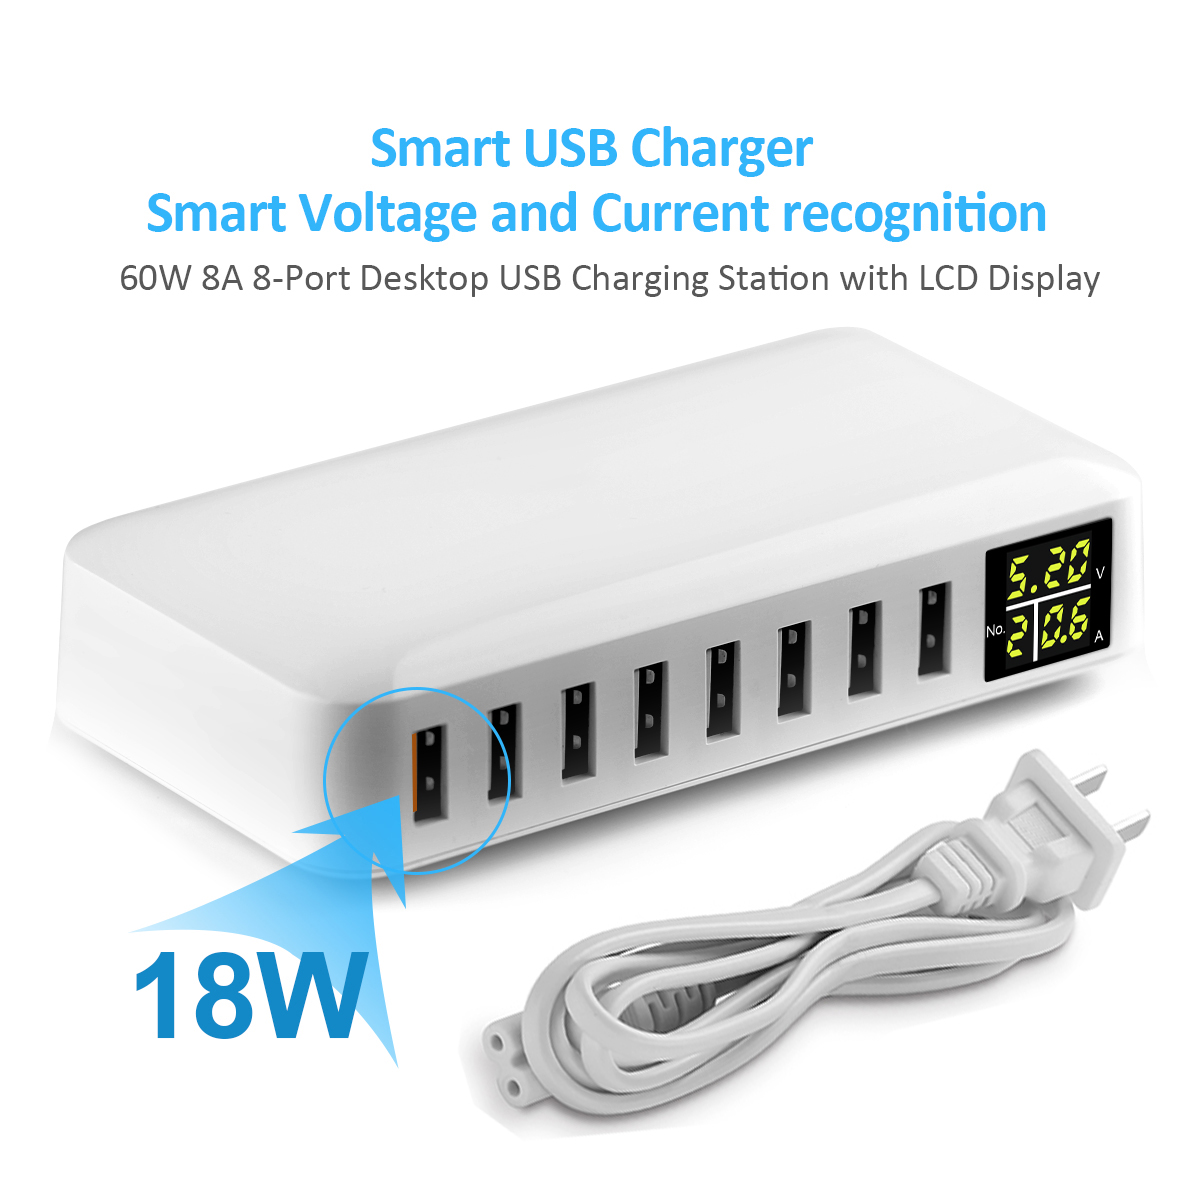 

8-Port Multi-Port Wall Charger 60W MAX 8A with QC Port 18W Smart LCD Display Desktop Charging Station for Phone Tablets iPad Express